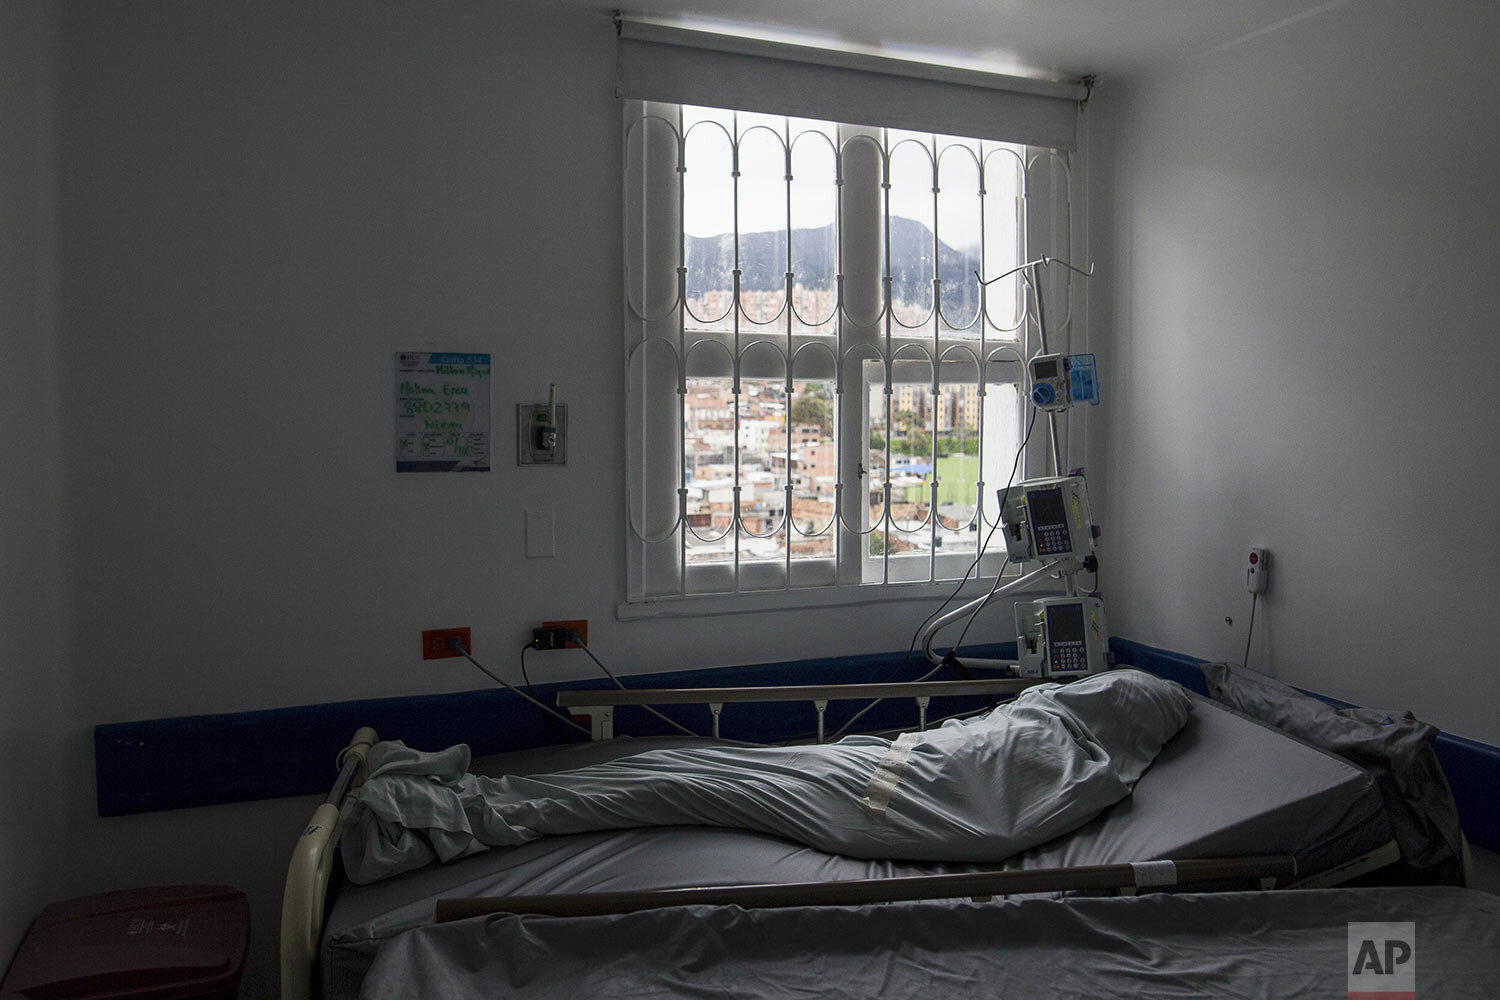  The body of a patient who died of COVID-19 lies wrapped in a body bag at the Samaritana Hospital in Bogota, Colombia, June 3, 2021. (AP Photo/Ivan Valencia) 